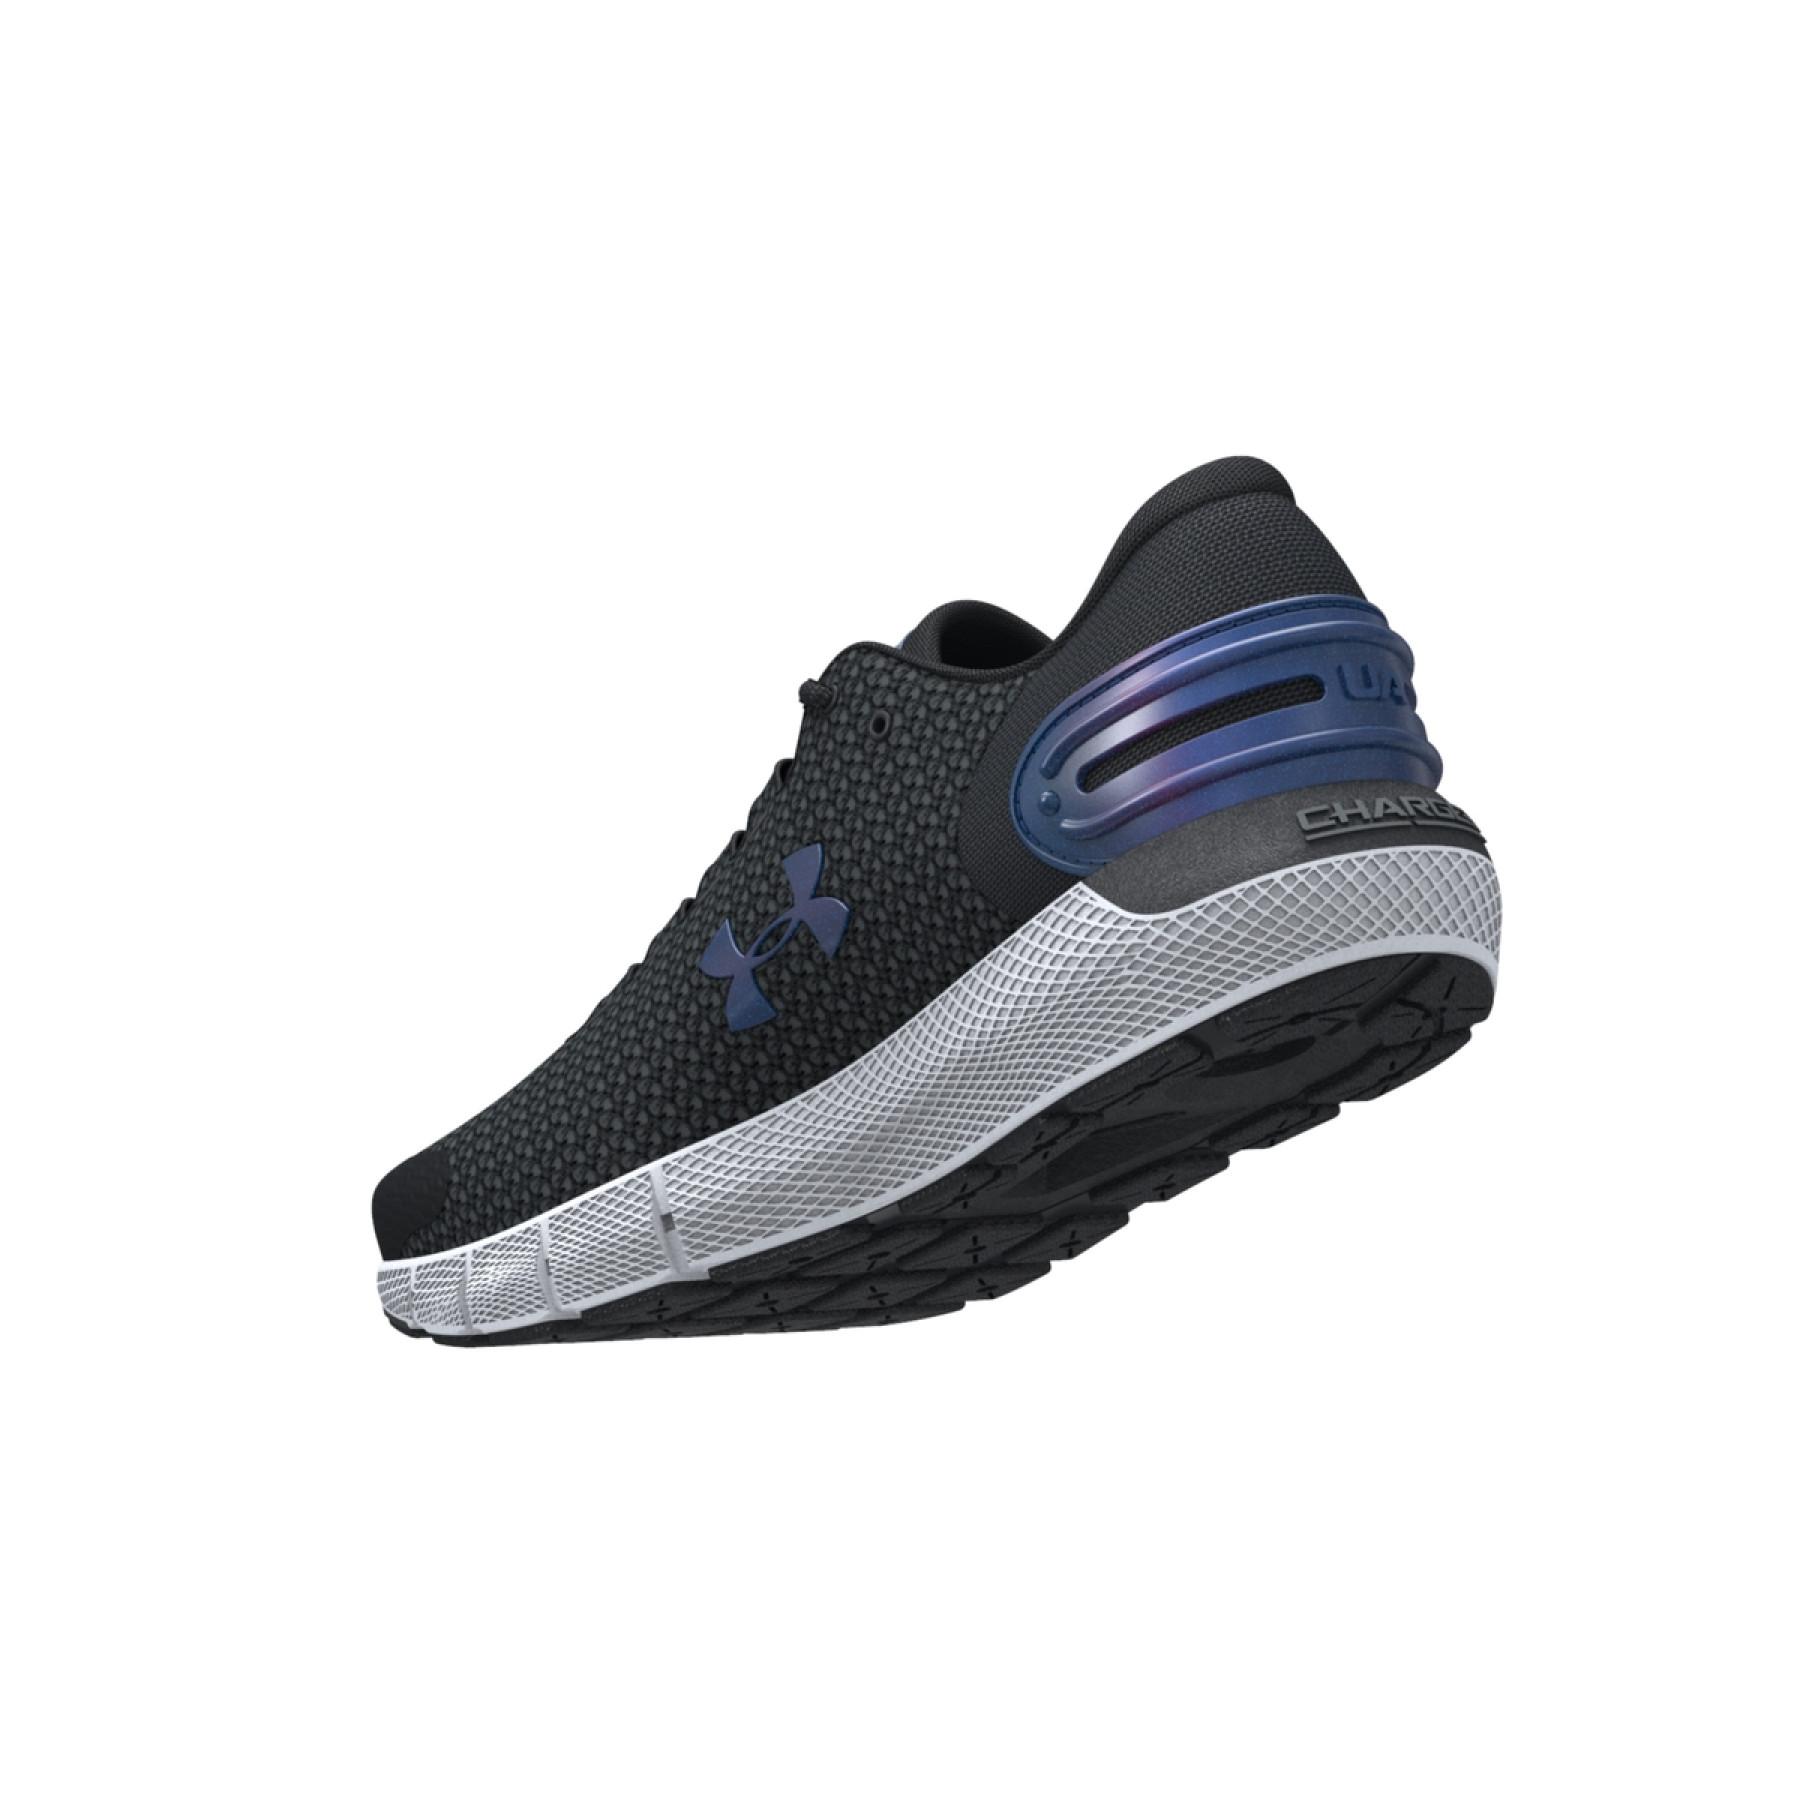 Zapatillas de running para mujer Under Armour Charged Rogue 2.5 Colorshift